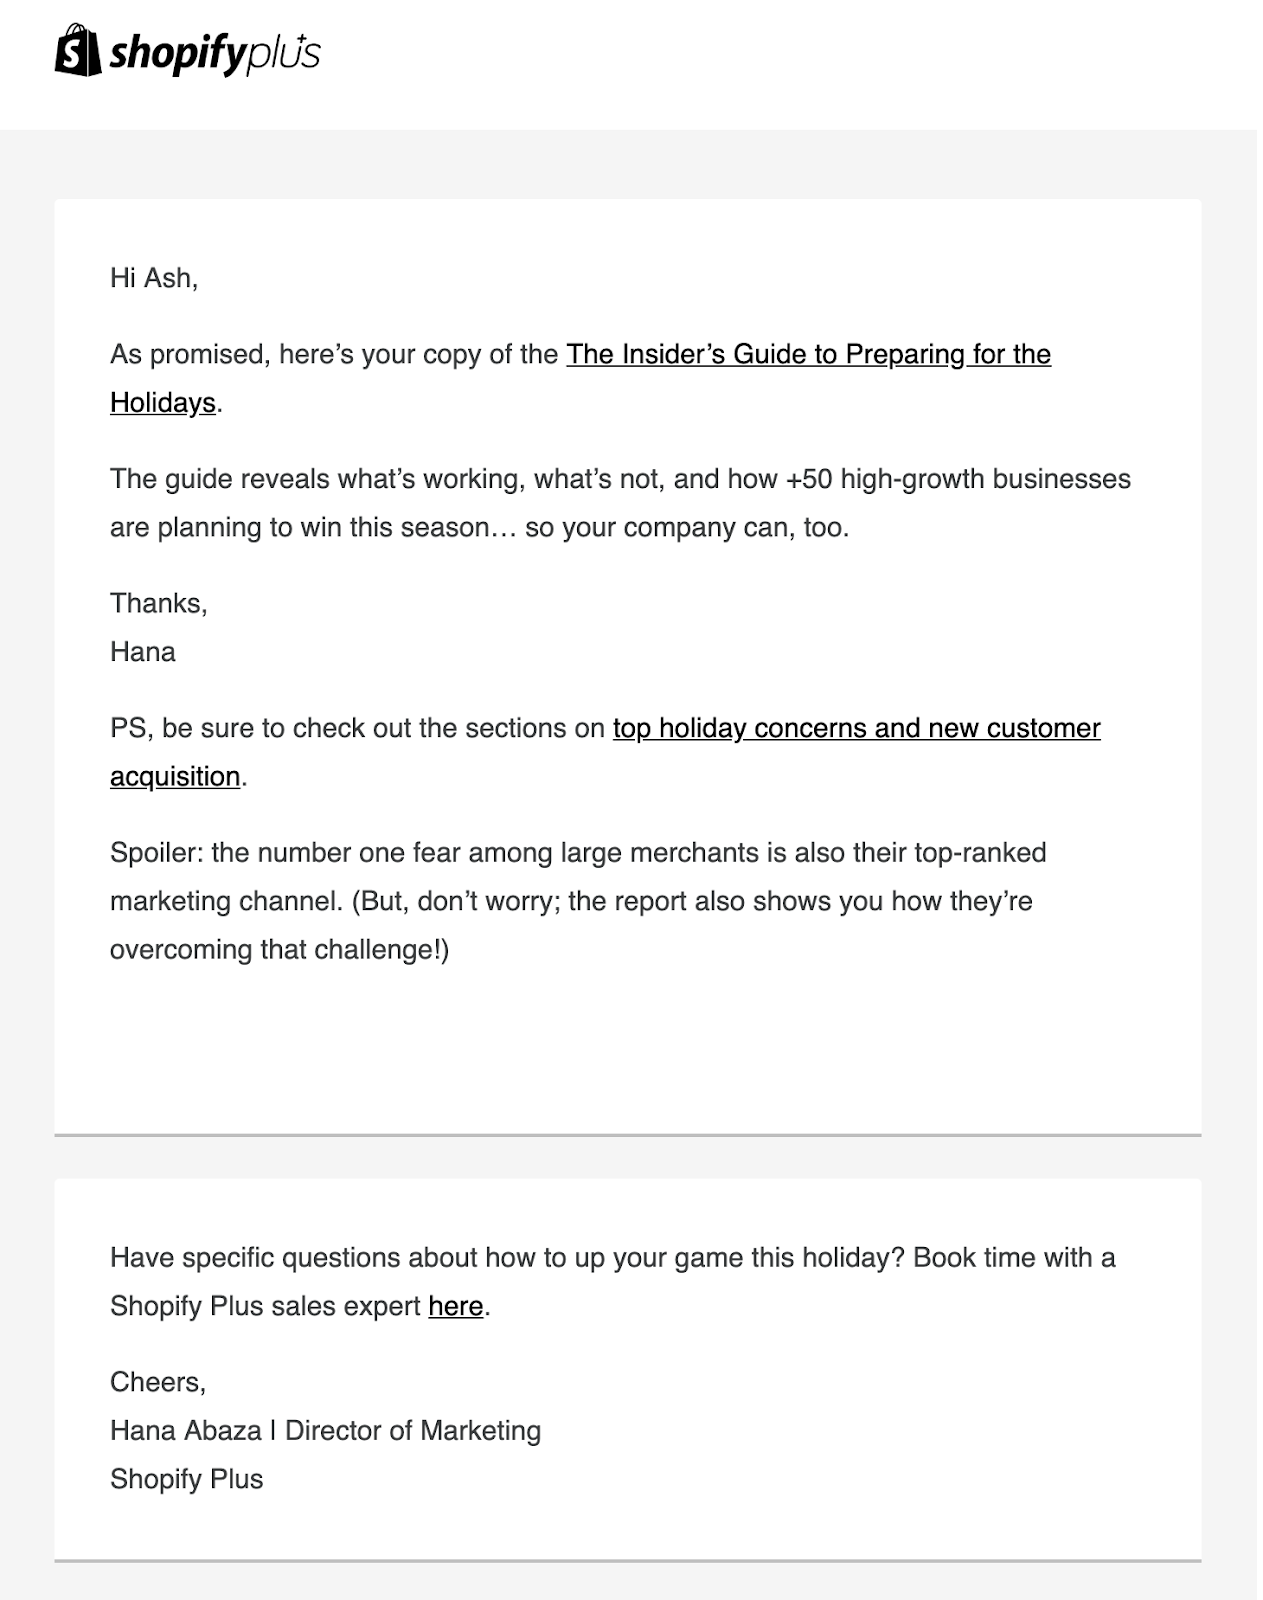 Screenshot of email from Shopify